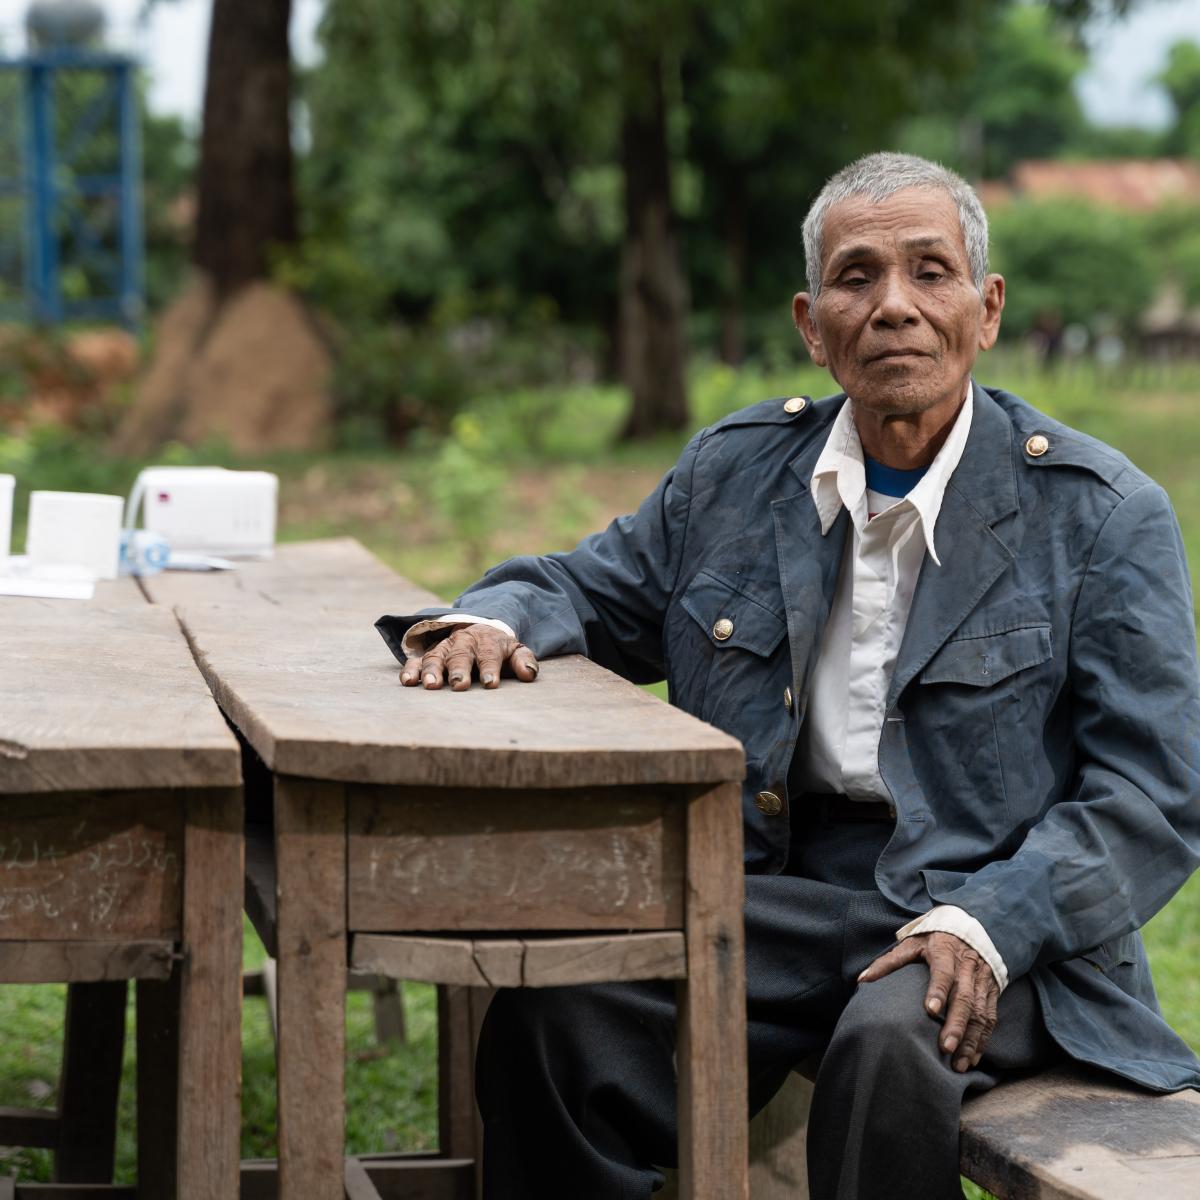 Now 73, Mr Lokxayyalueb caught lymphatic filariasis, a neglected tropical disease, from a mosquito bite.